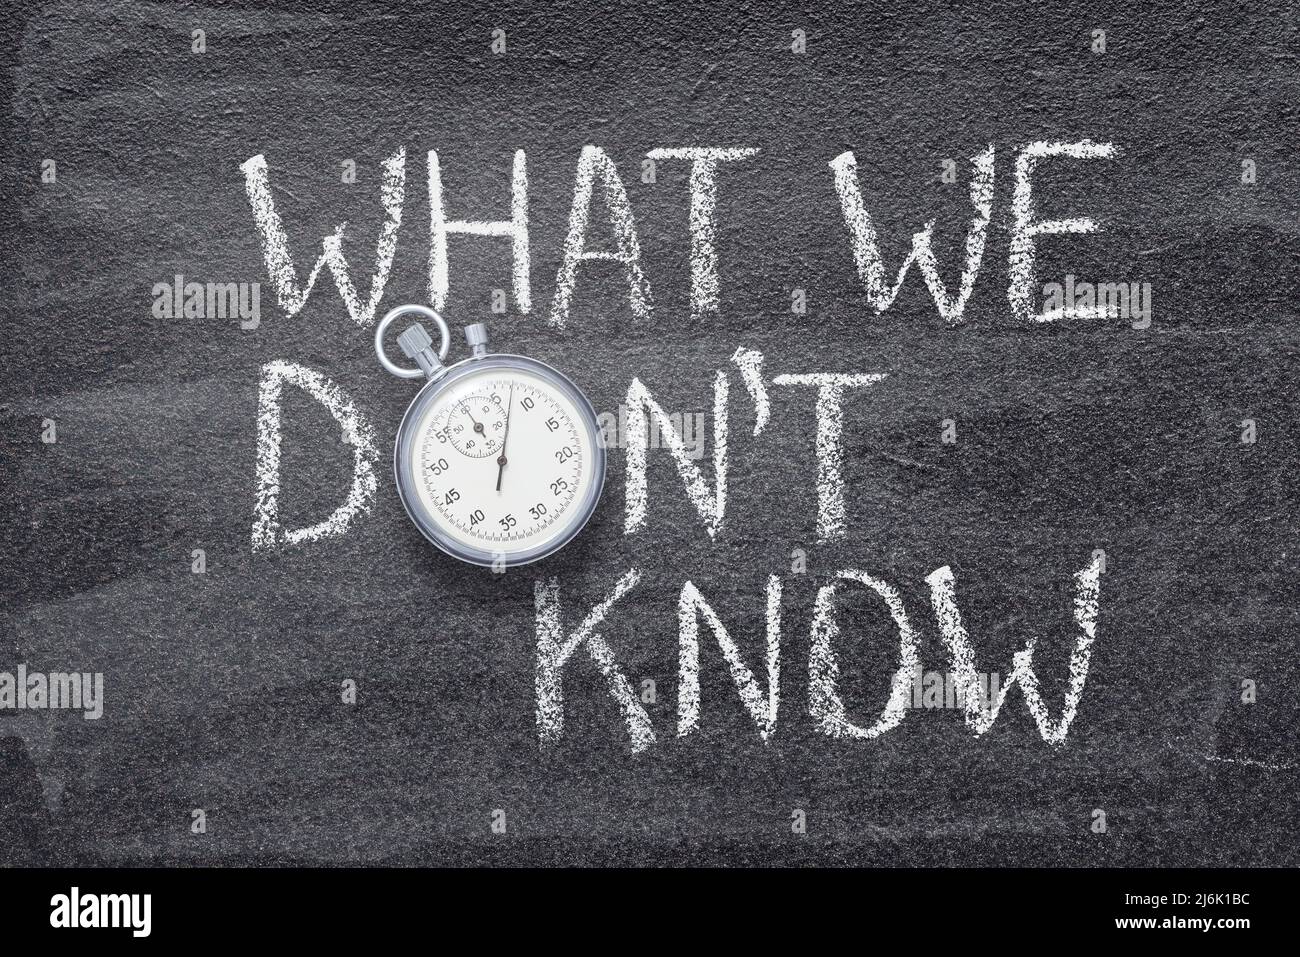 what we don’t know phrase written on chalkboard with vintage precise stopwatch Stock Photo